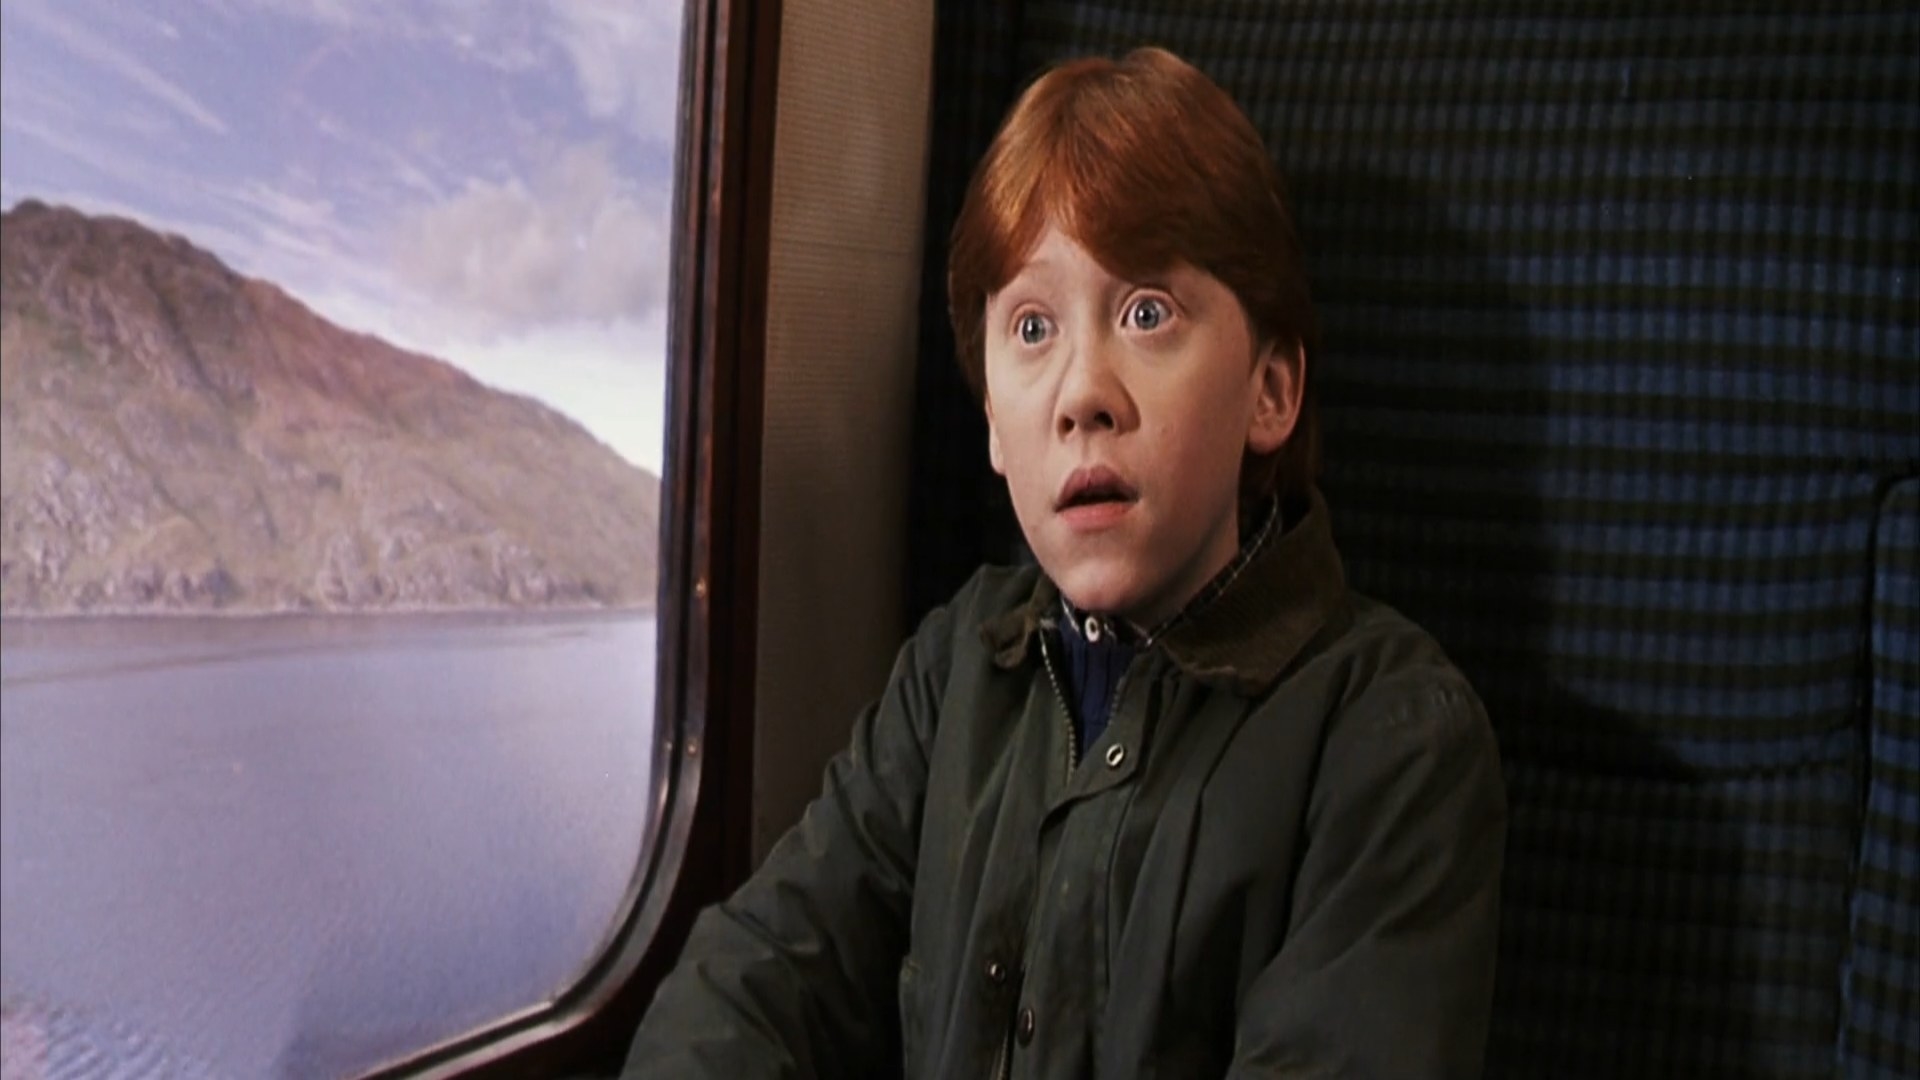 Rupert Grint is sitting in a train compartment and looks in surprise at someone